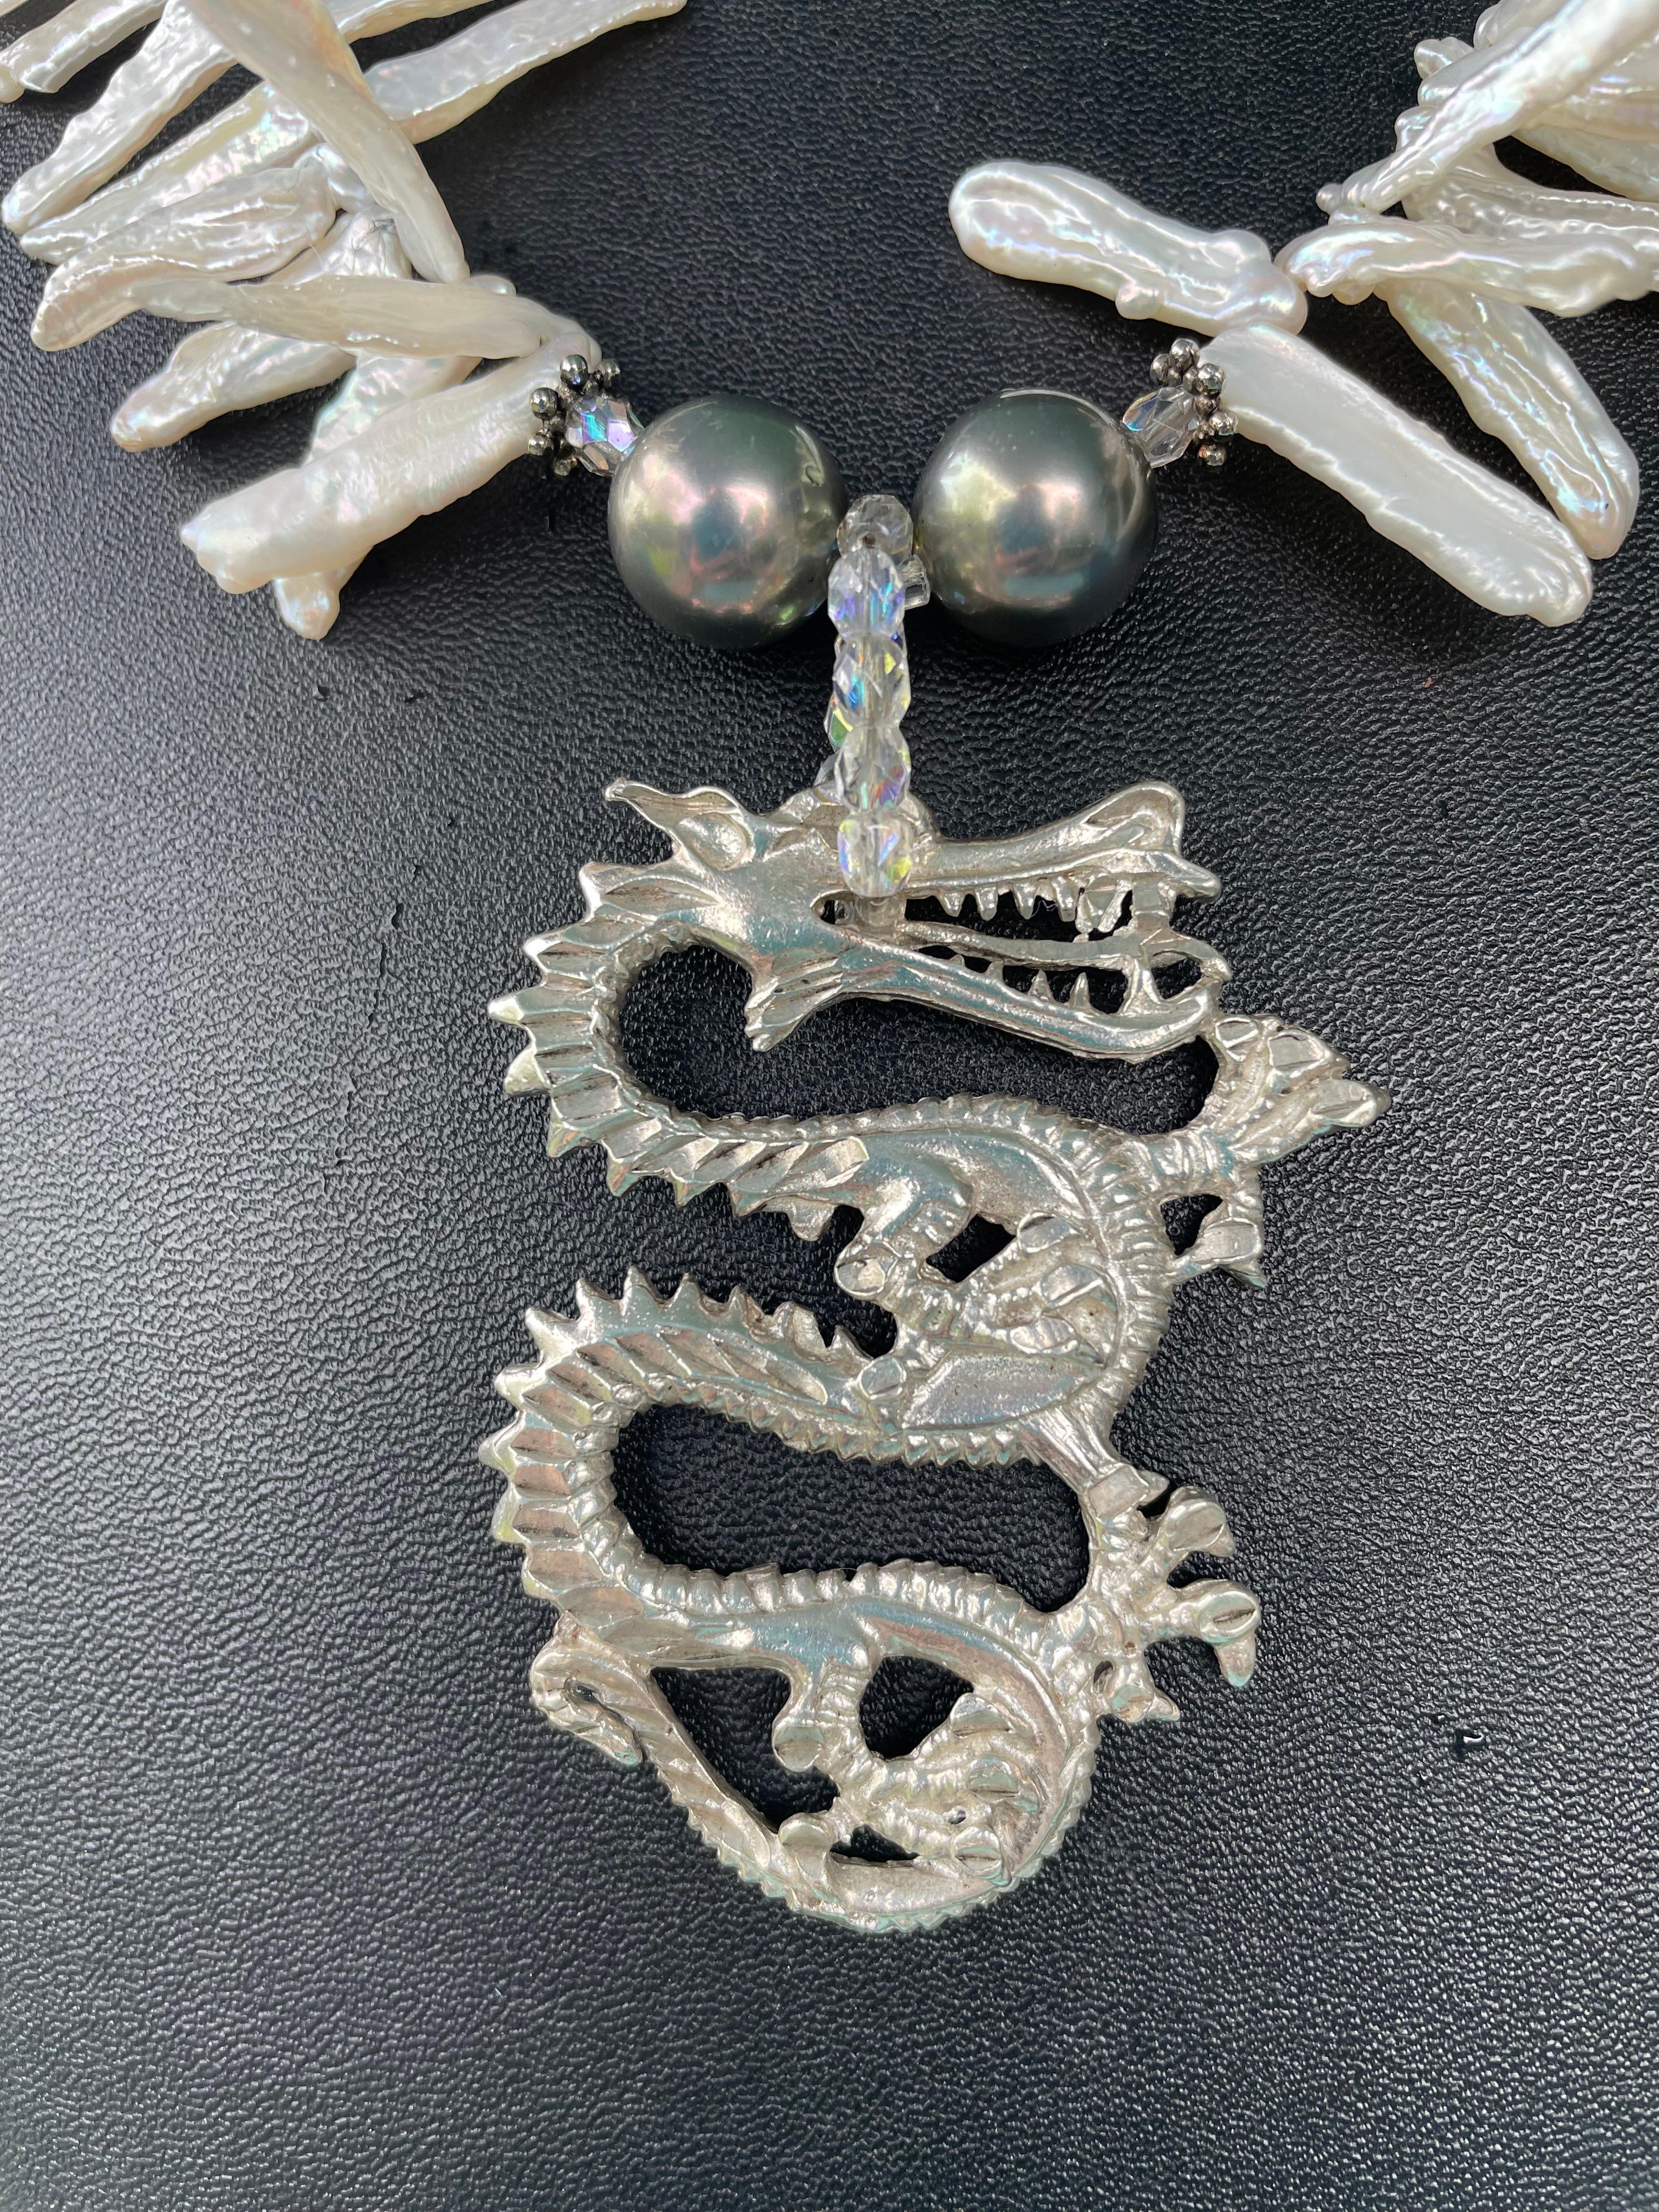 Lorraine’s Bijoux offers a One of a Kind; Vintage Sterling Silver, Chinese Dragon pendant necklace. This is a beautifully wrought Sterling pendant with outstanding detail and a lovely patina. This handmade piece features Peacock Majorcan pearls,